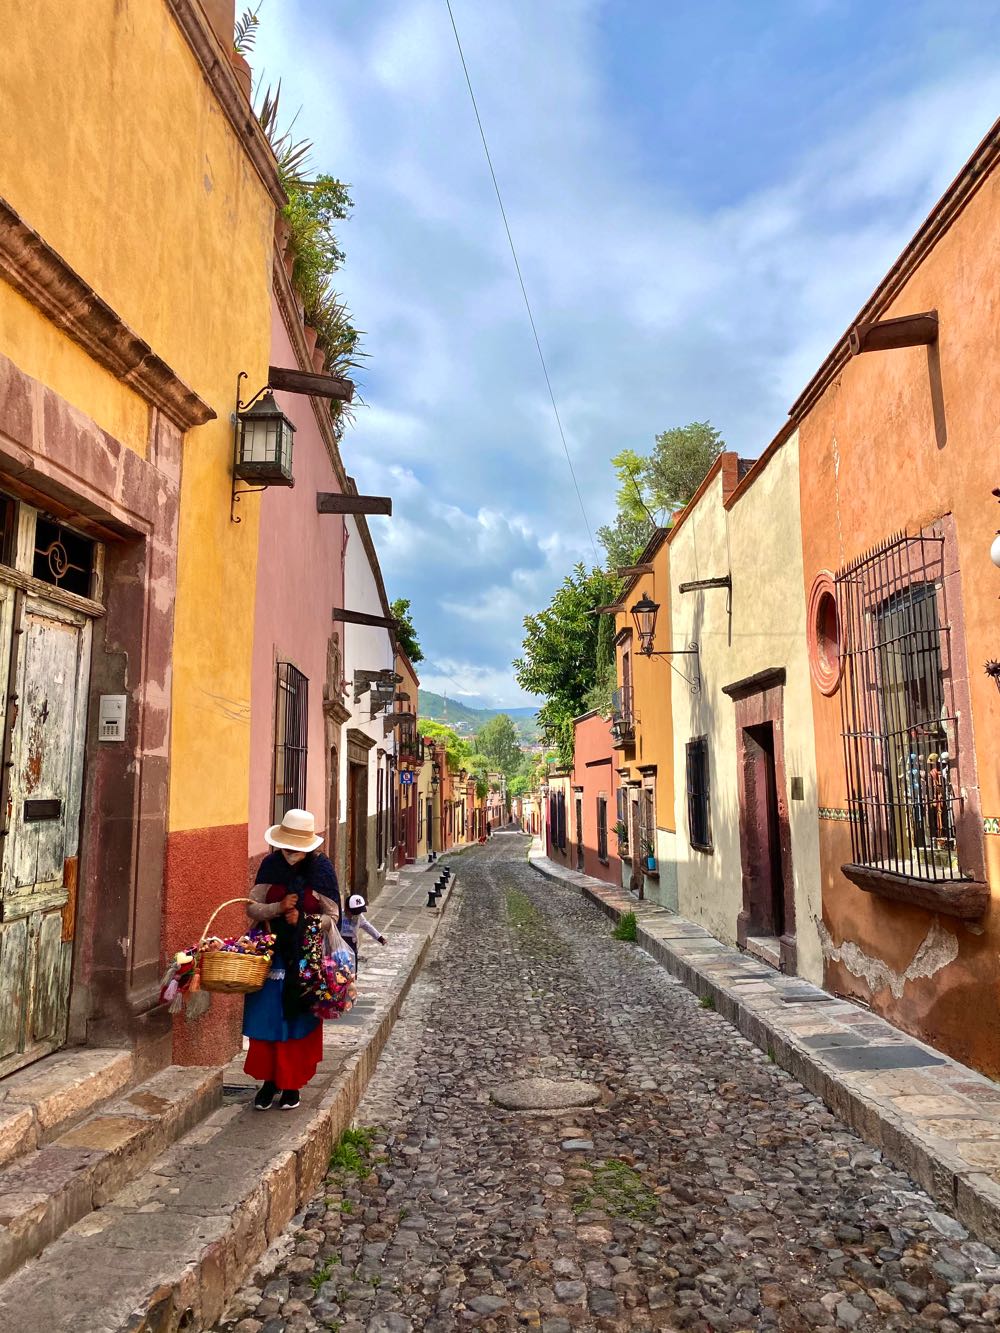 Joining a walking tour is one of the best things to do in San Miguel de Allende.